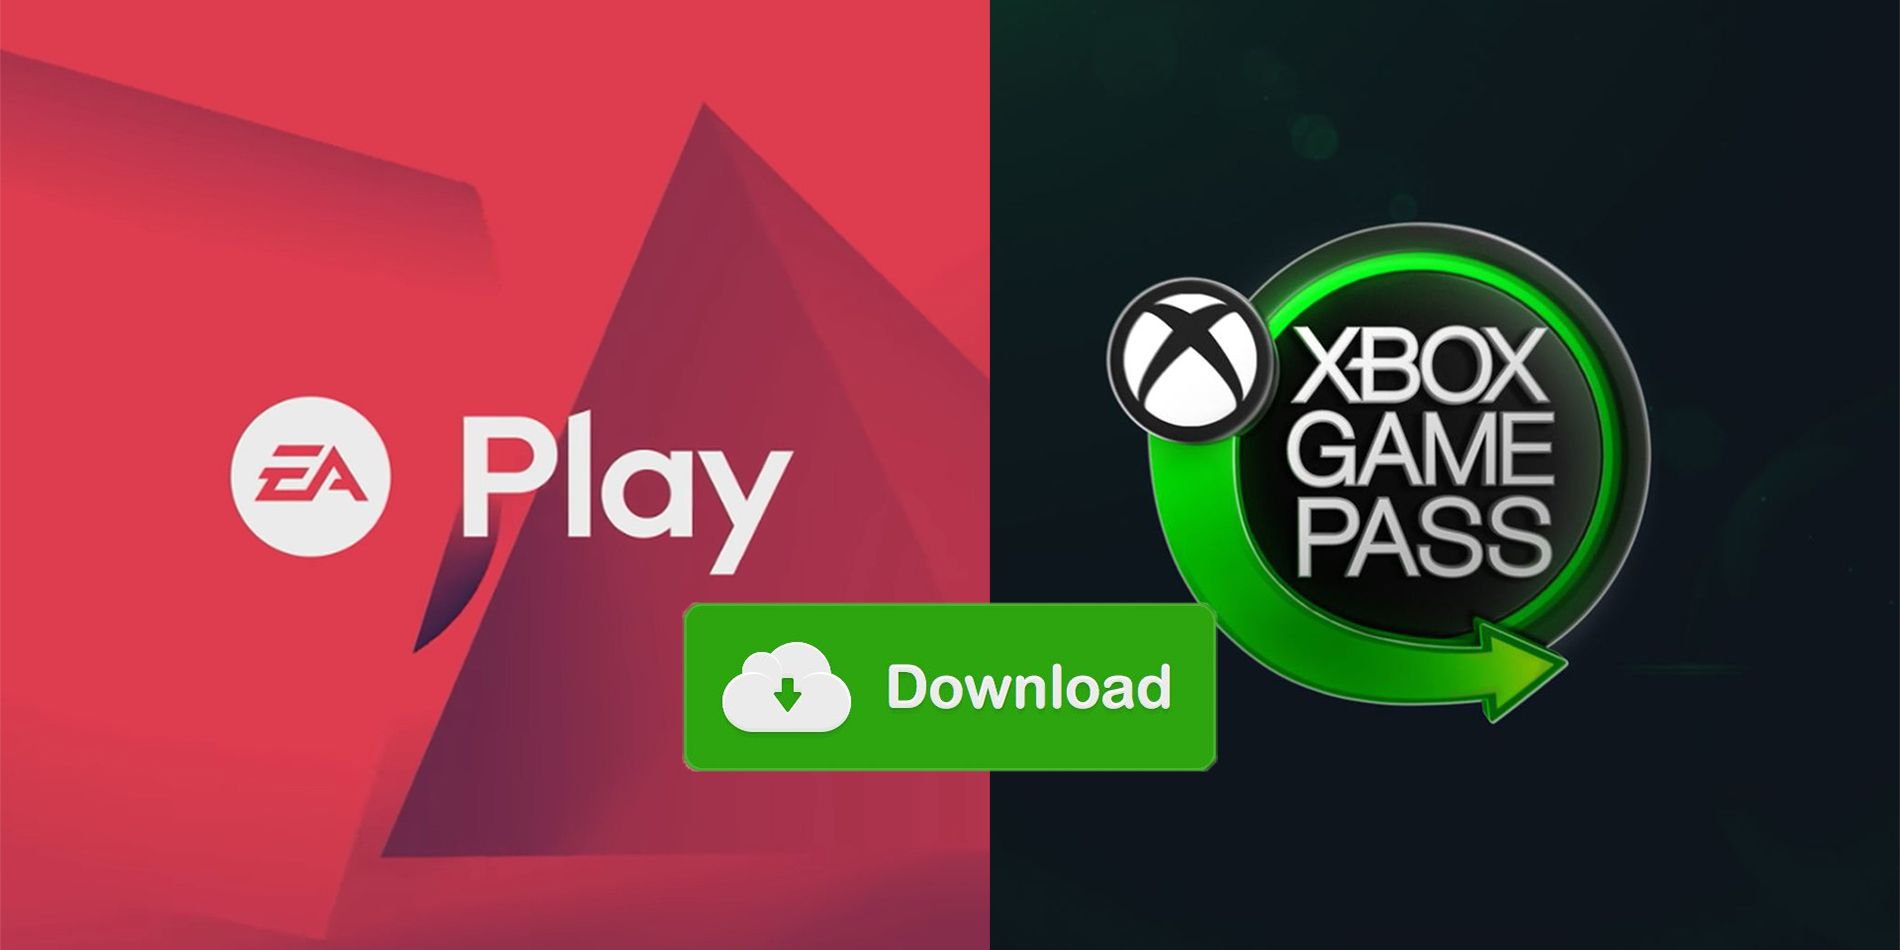 EA Play & Xbox Game Pass - Everything You Need to Know 